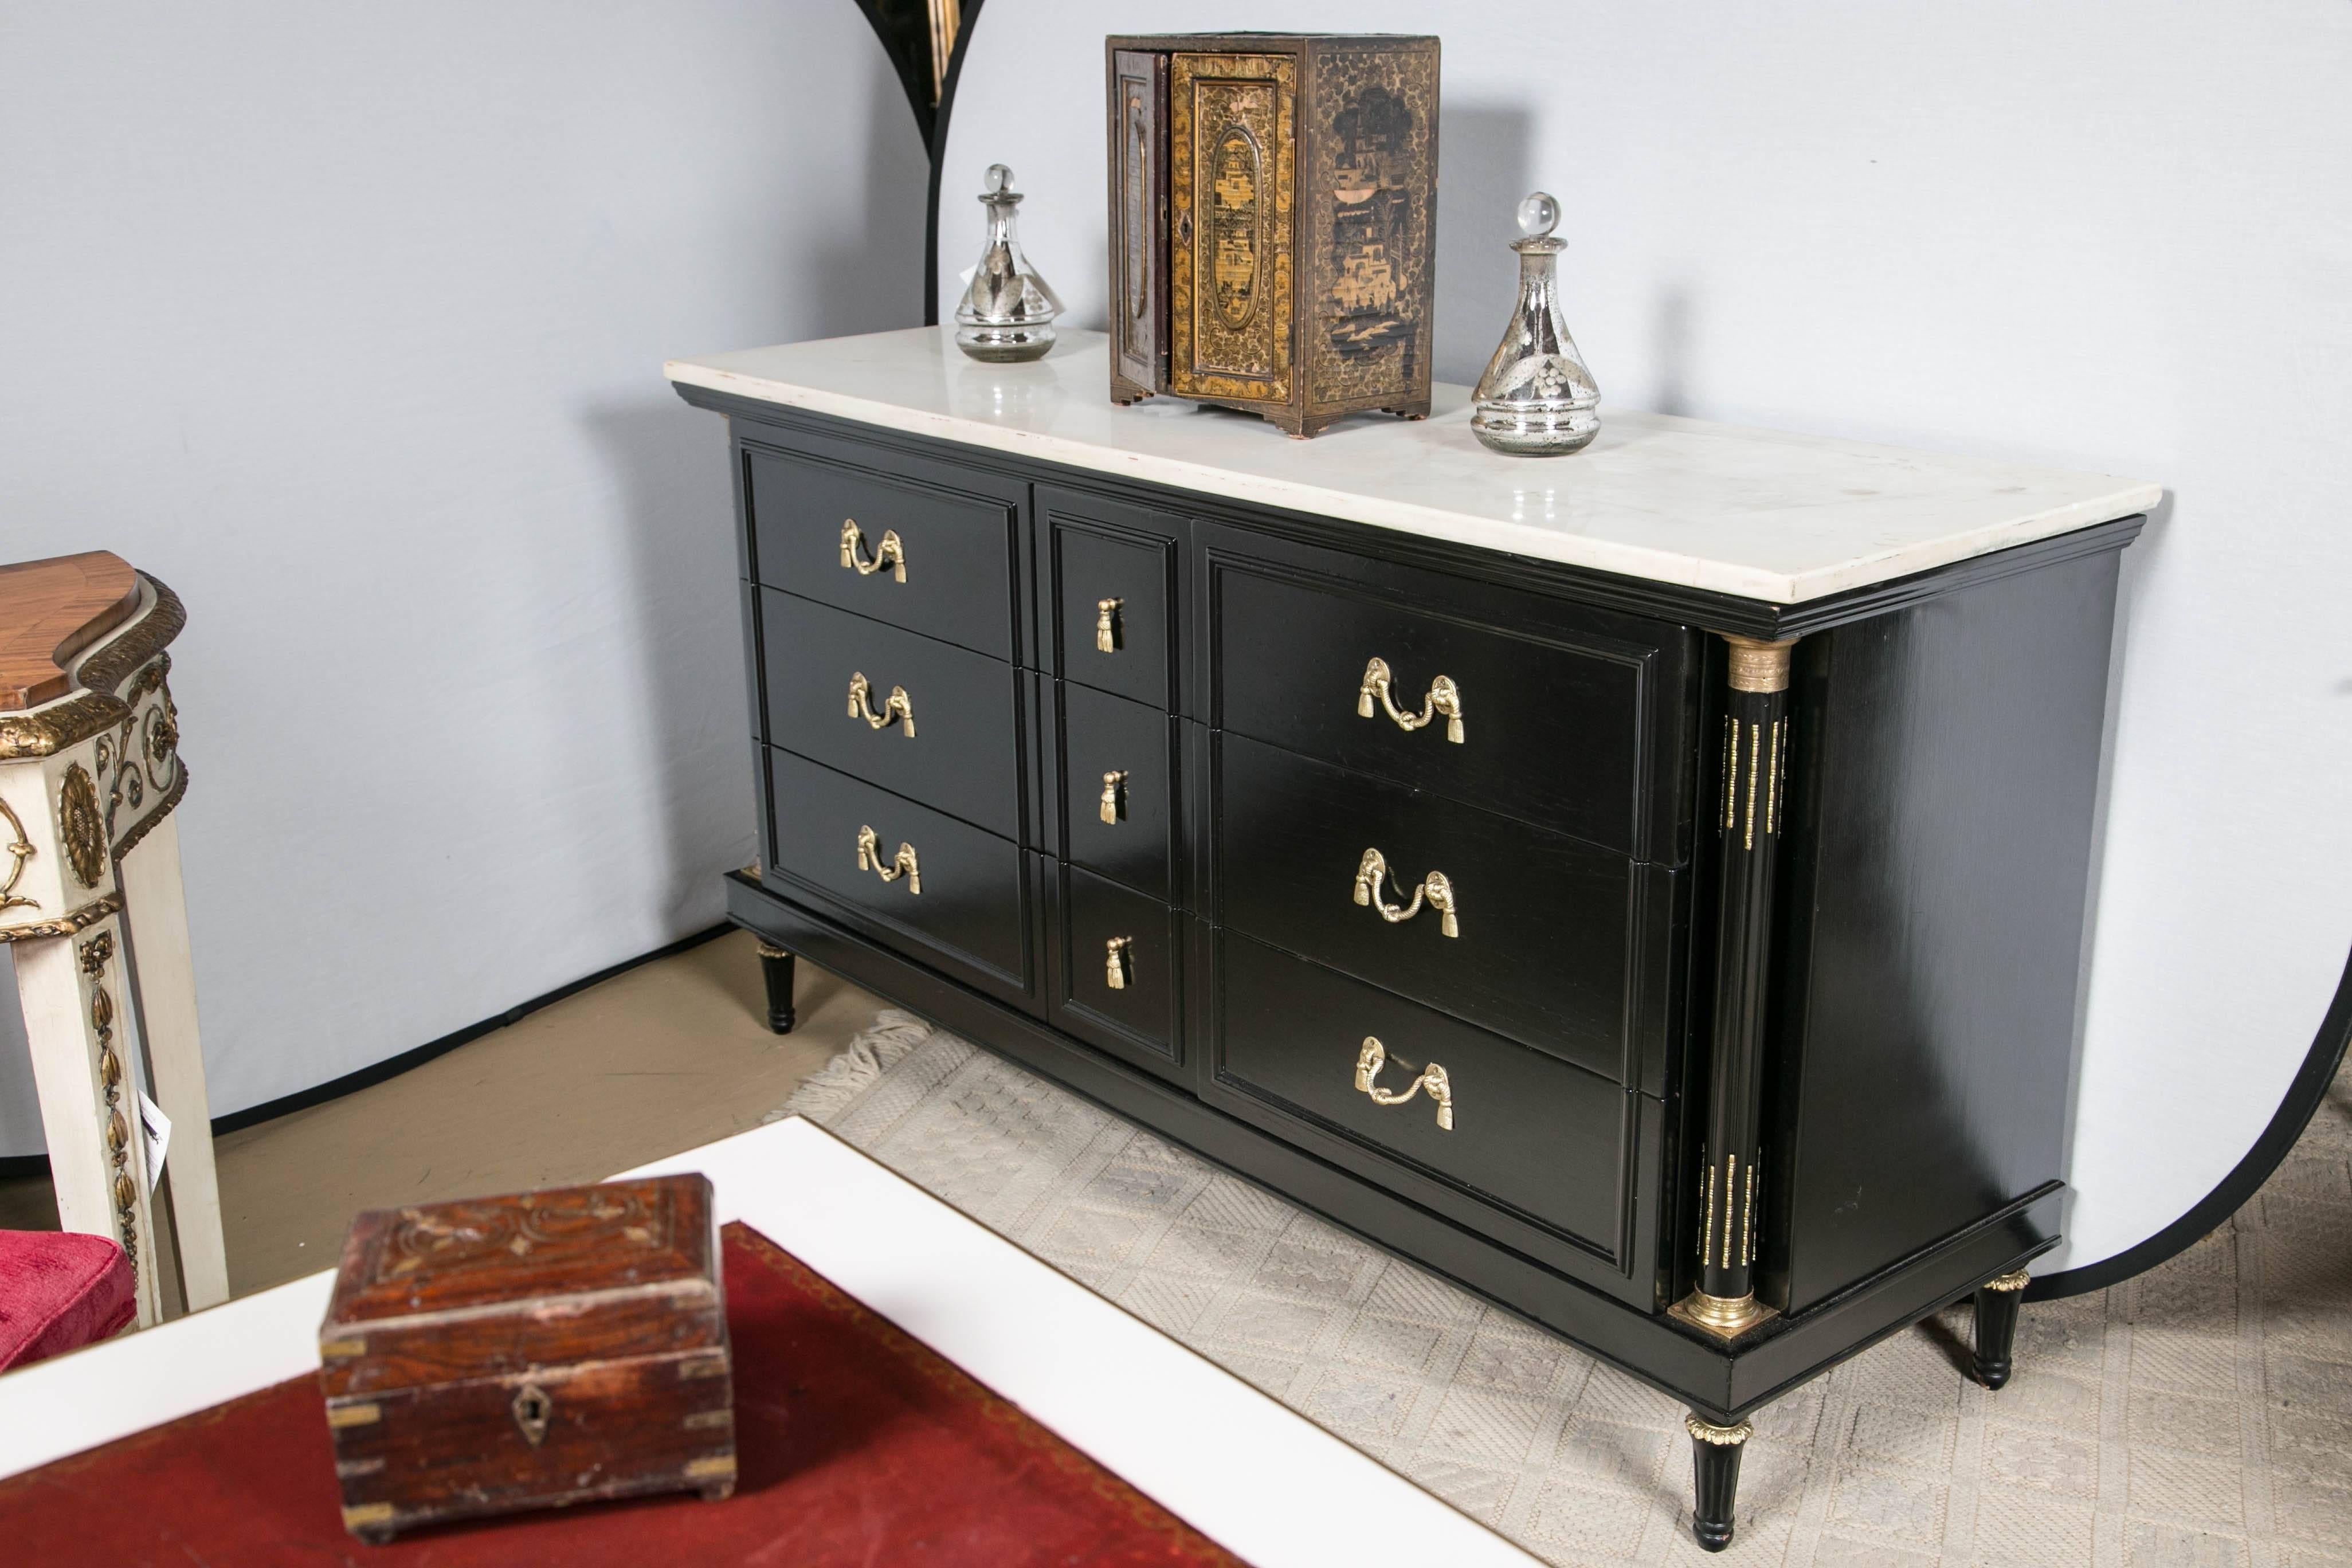 Louis XVI style marble-top ebonized dresser or sideboard by Maison Jansen. This finely detailed chest commode has three center drawers flaked by three larger drawers bearing a wonderful drape and tastle form group of bronze pulls. This is a fine